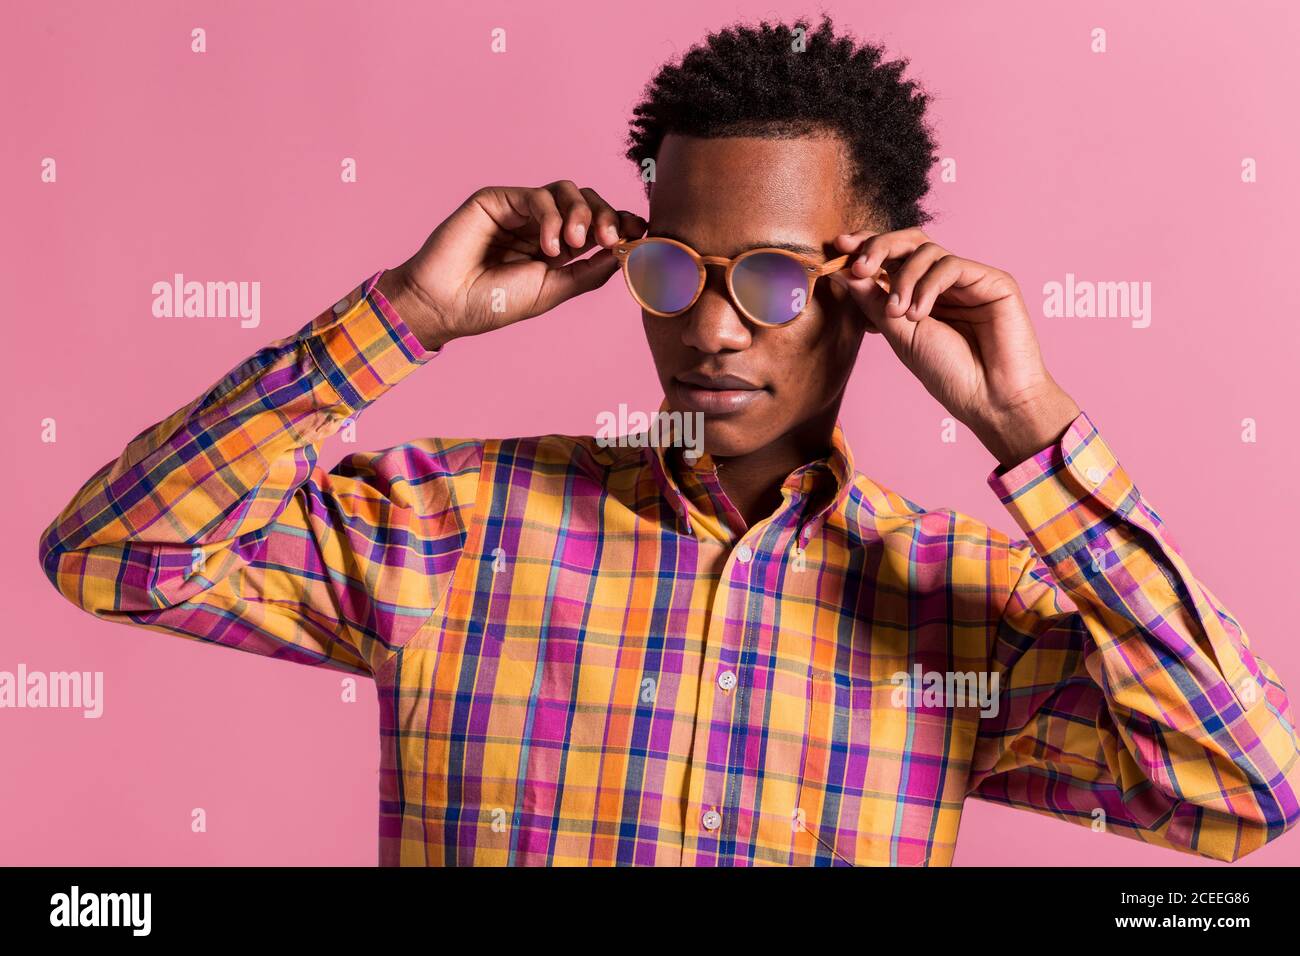 Trendy black man wearing colorful checkered shirt with shiny pink sunglasses standing on pink background Stock Photo